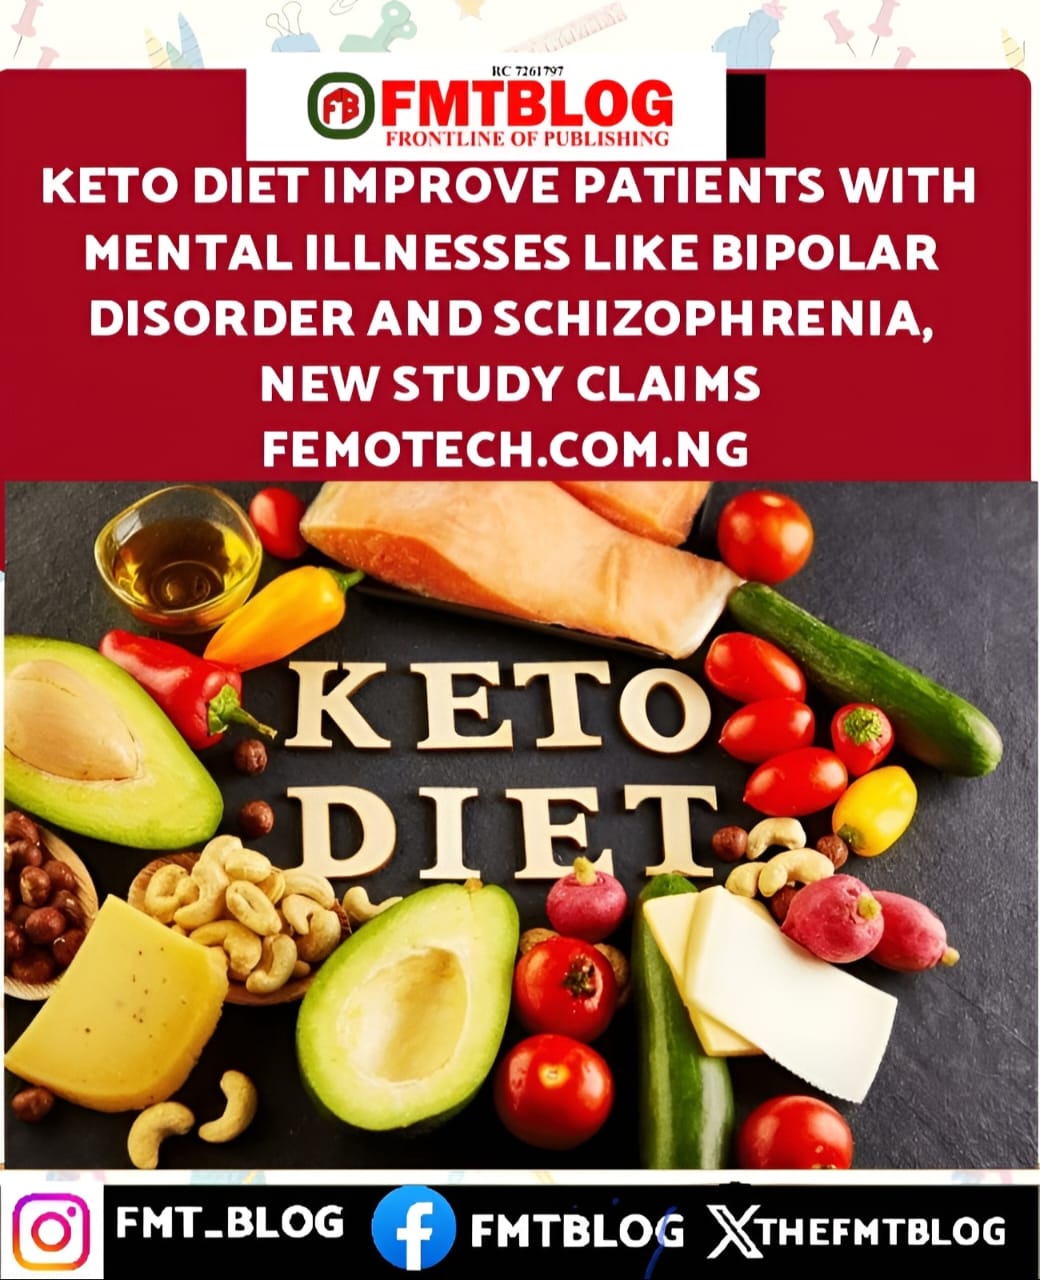 Keto Diet May Improve Patients With Mental Illnesses Like Bipolar Disorder And Schizophrenia, New Study Claims